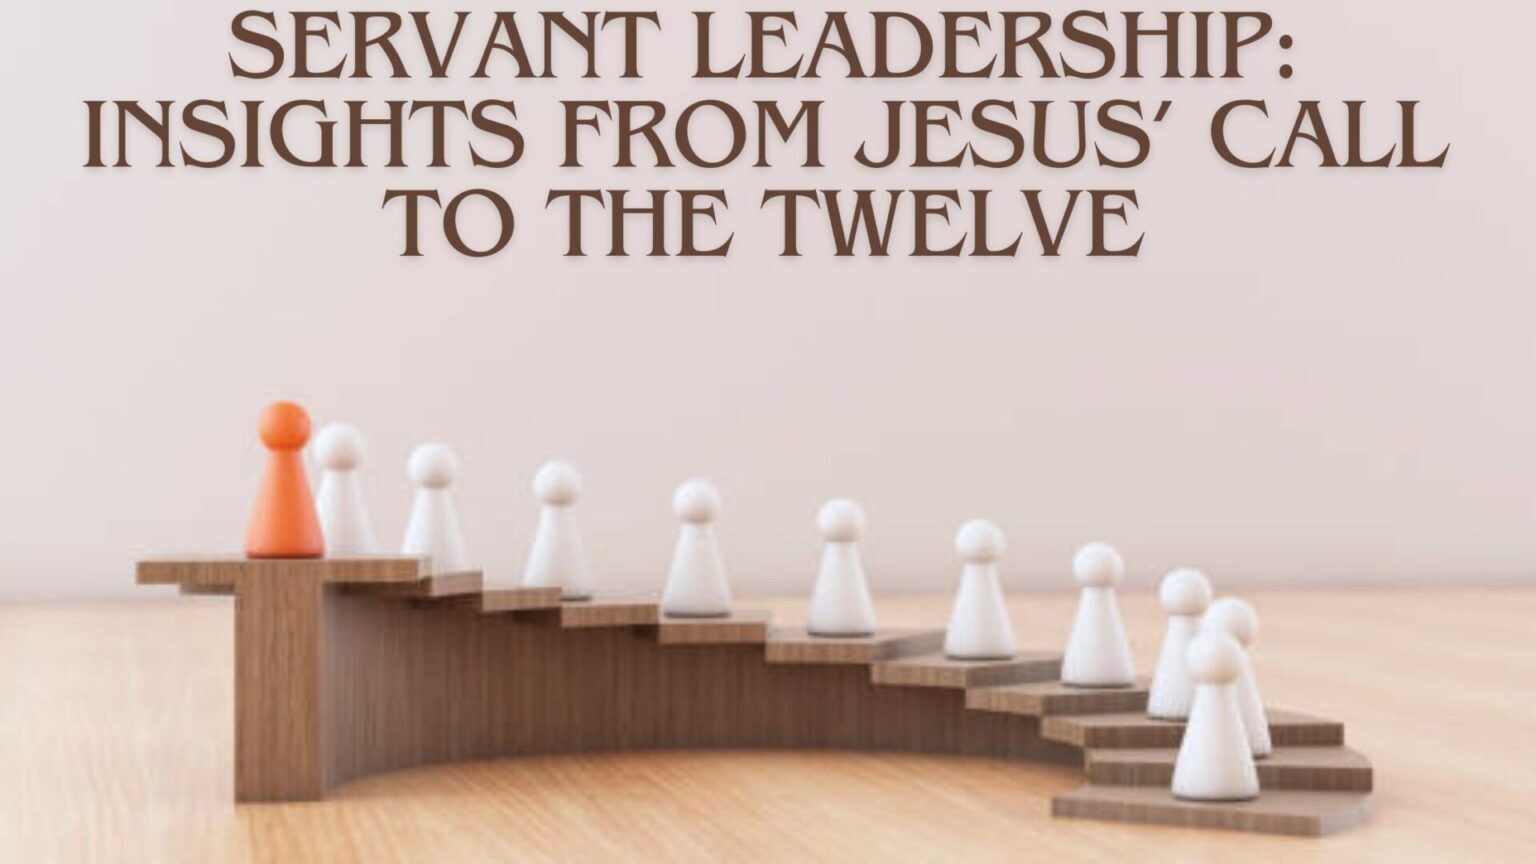 Servant Leadership: Insights from Jesus’ Call to the Twelve